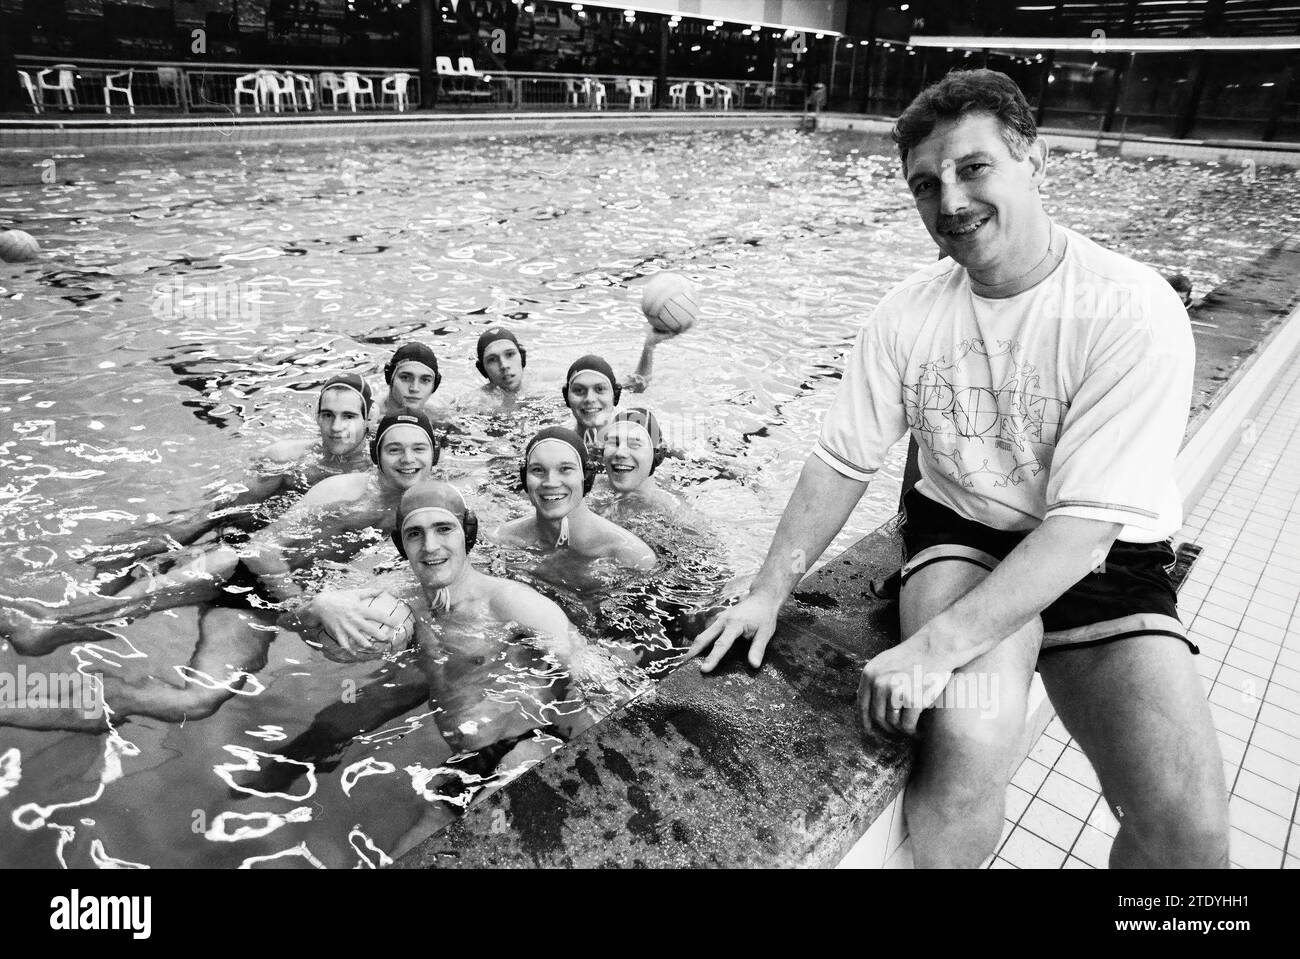 Water polo team, Rapido 82, 30-11-1993, Whizgle News from the Past, Tailored for the Future. Explore historical narratives, Dutch The Netherlands agency image with a modern perspective, bridging the gap between yesterday's events and tomorrow's insights. A timeless journey shaping the stories that shape our future. Stock Photo